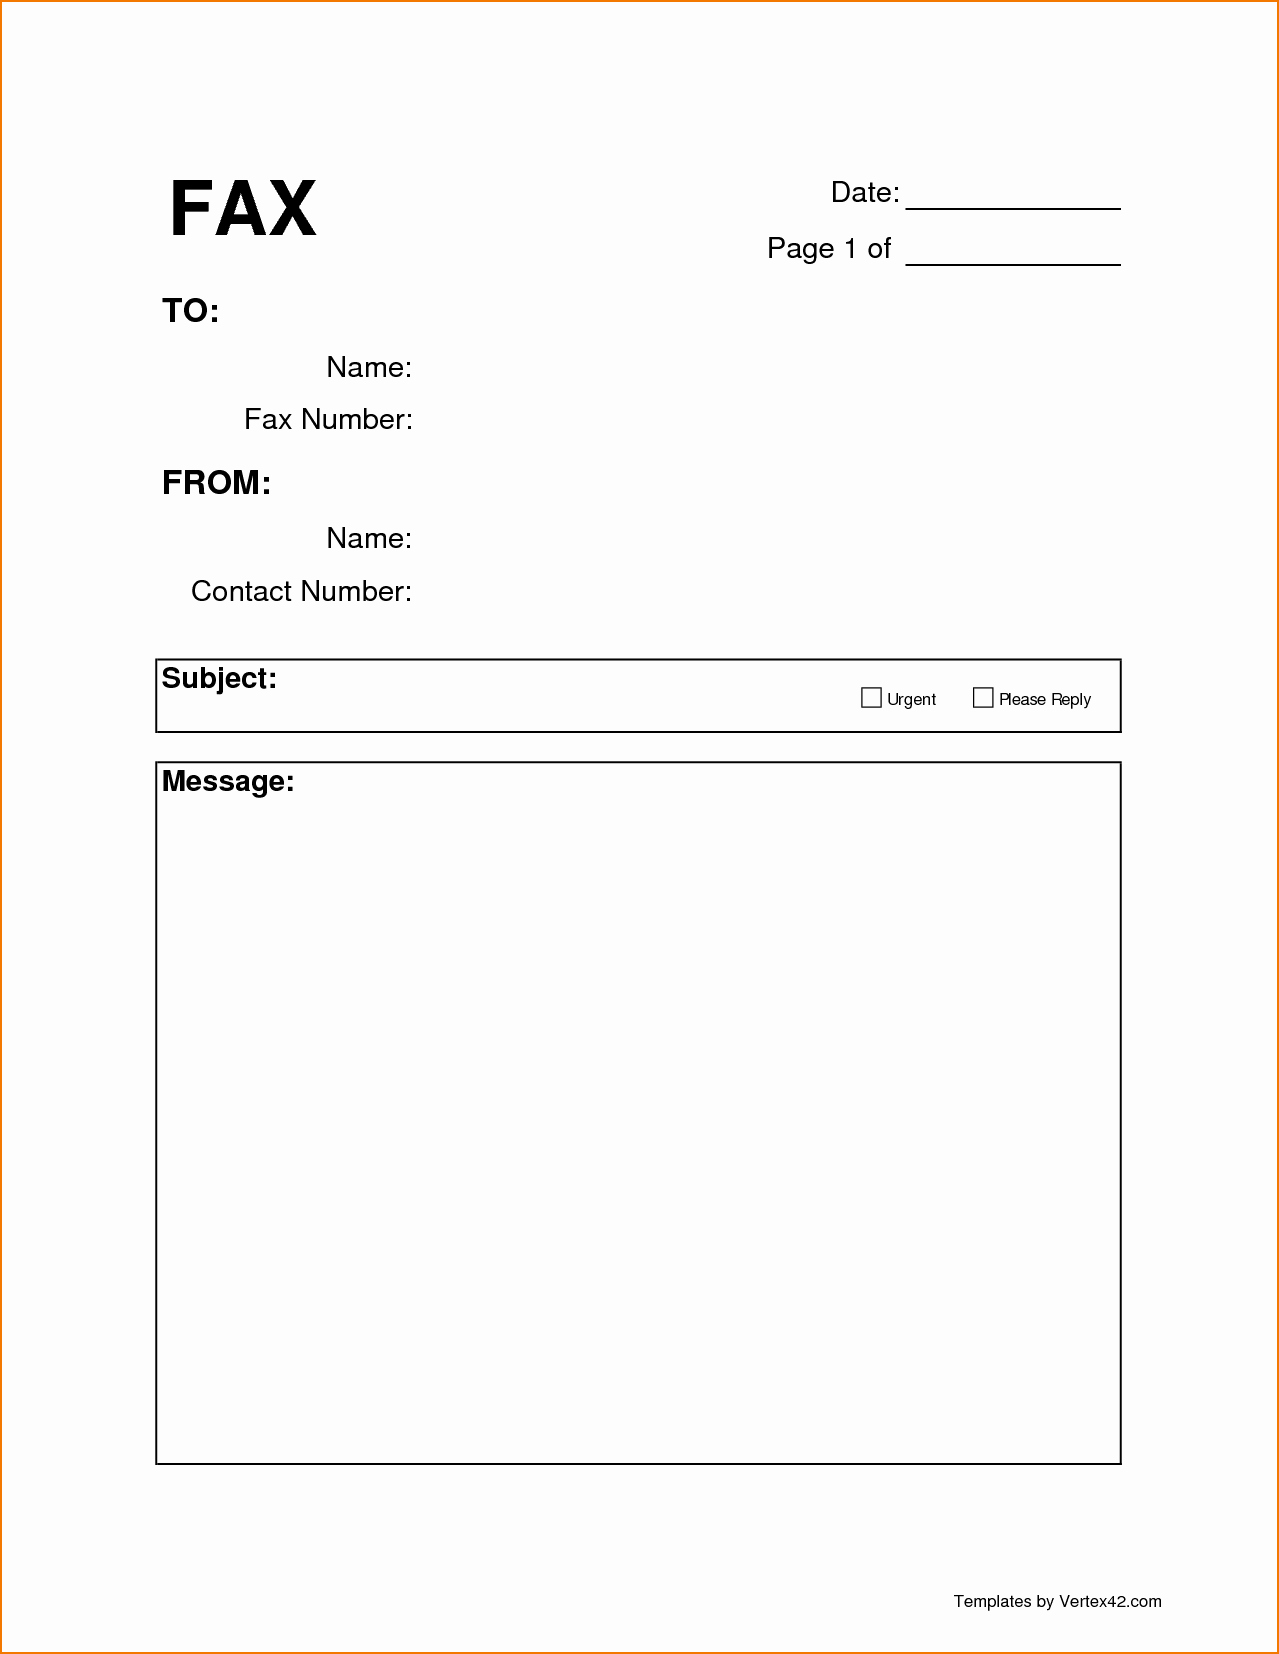 Fax Cover Sheet Pdf Free Lovely 5 Free Printable Fax Cover Sheets